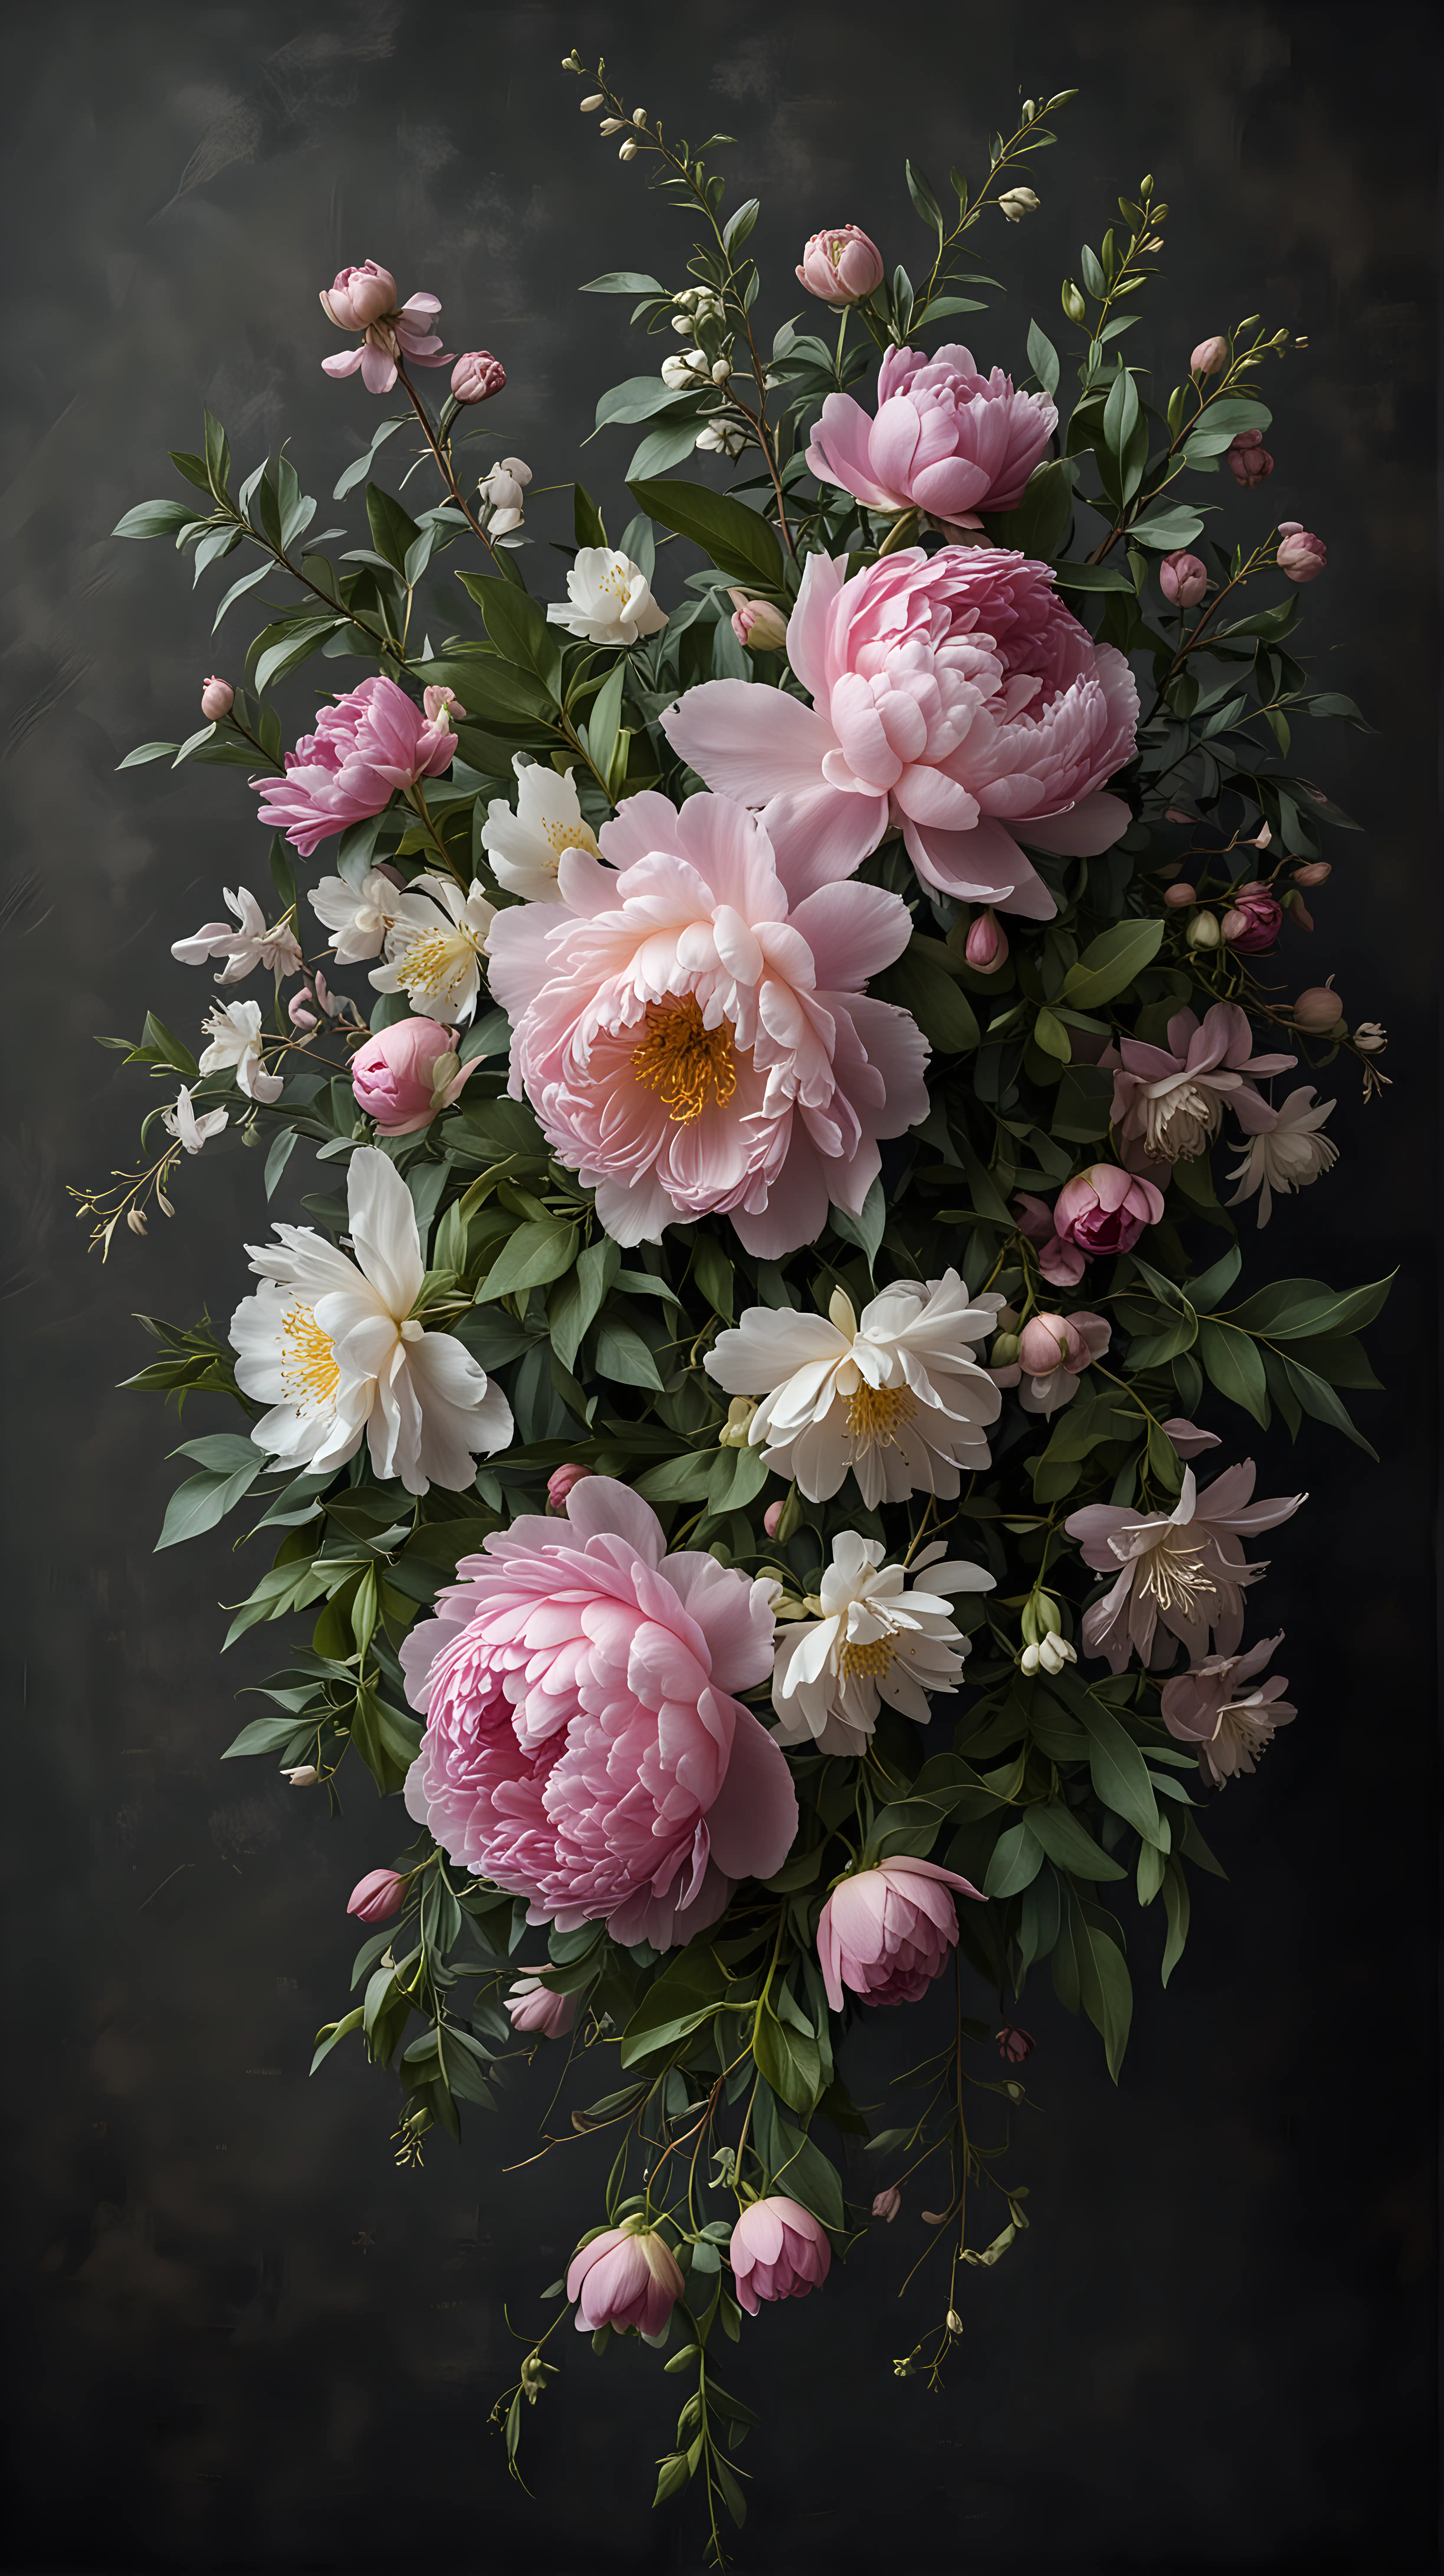 Ethereal Floral Arrangement Trailing Soft Pink Peonies and Jasmine